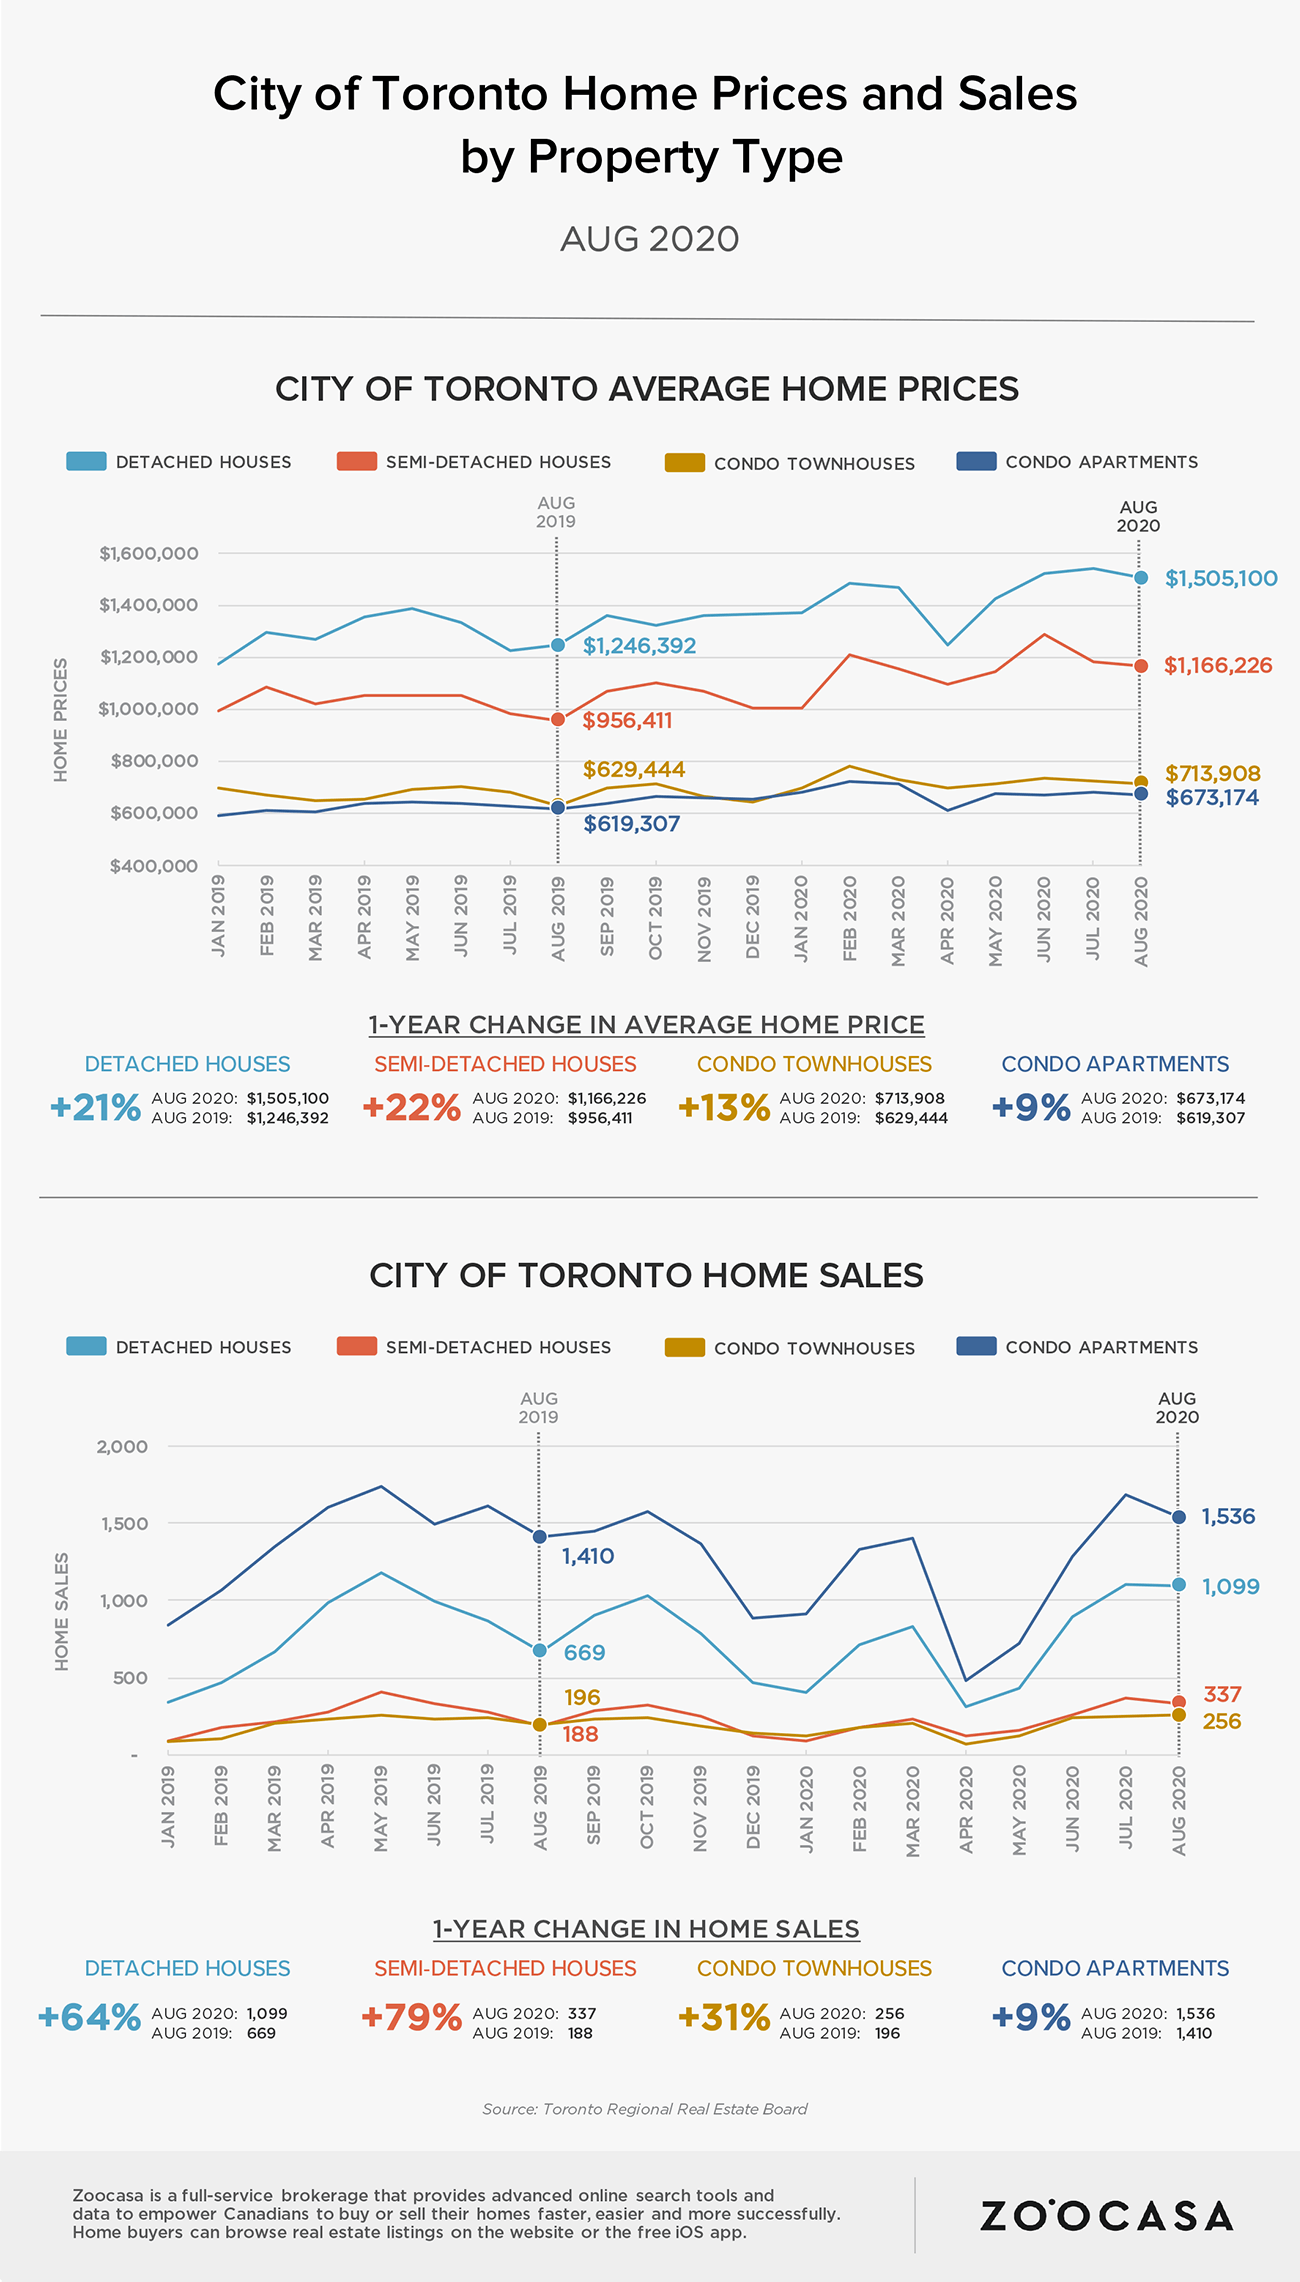 City of Toronto region home prices and sales in August 2020